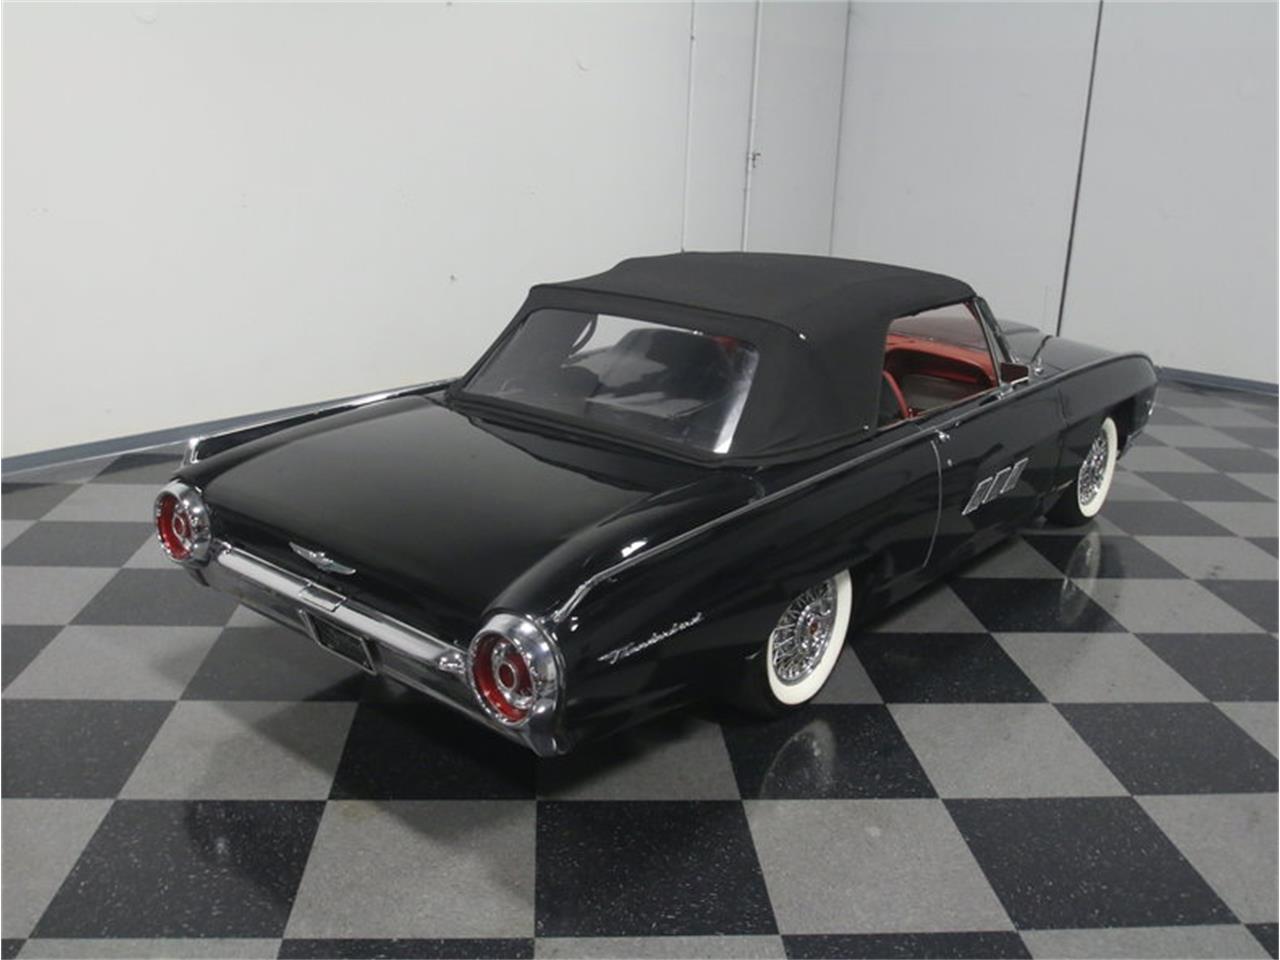 1963 ford thunderbird sports roadster colors